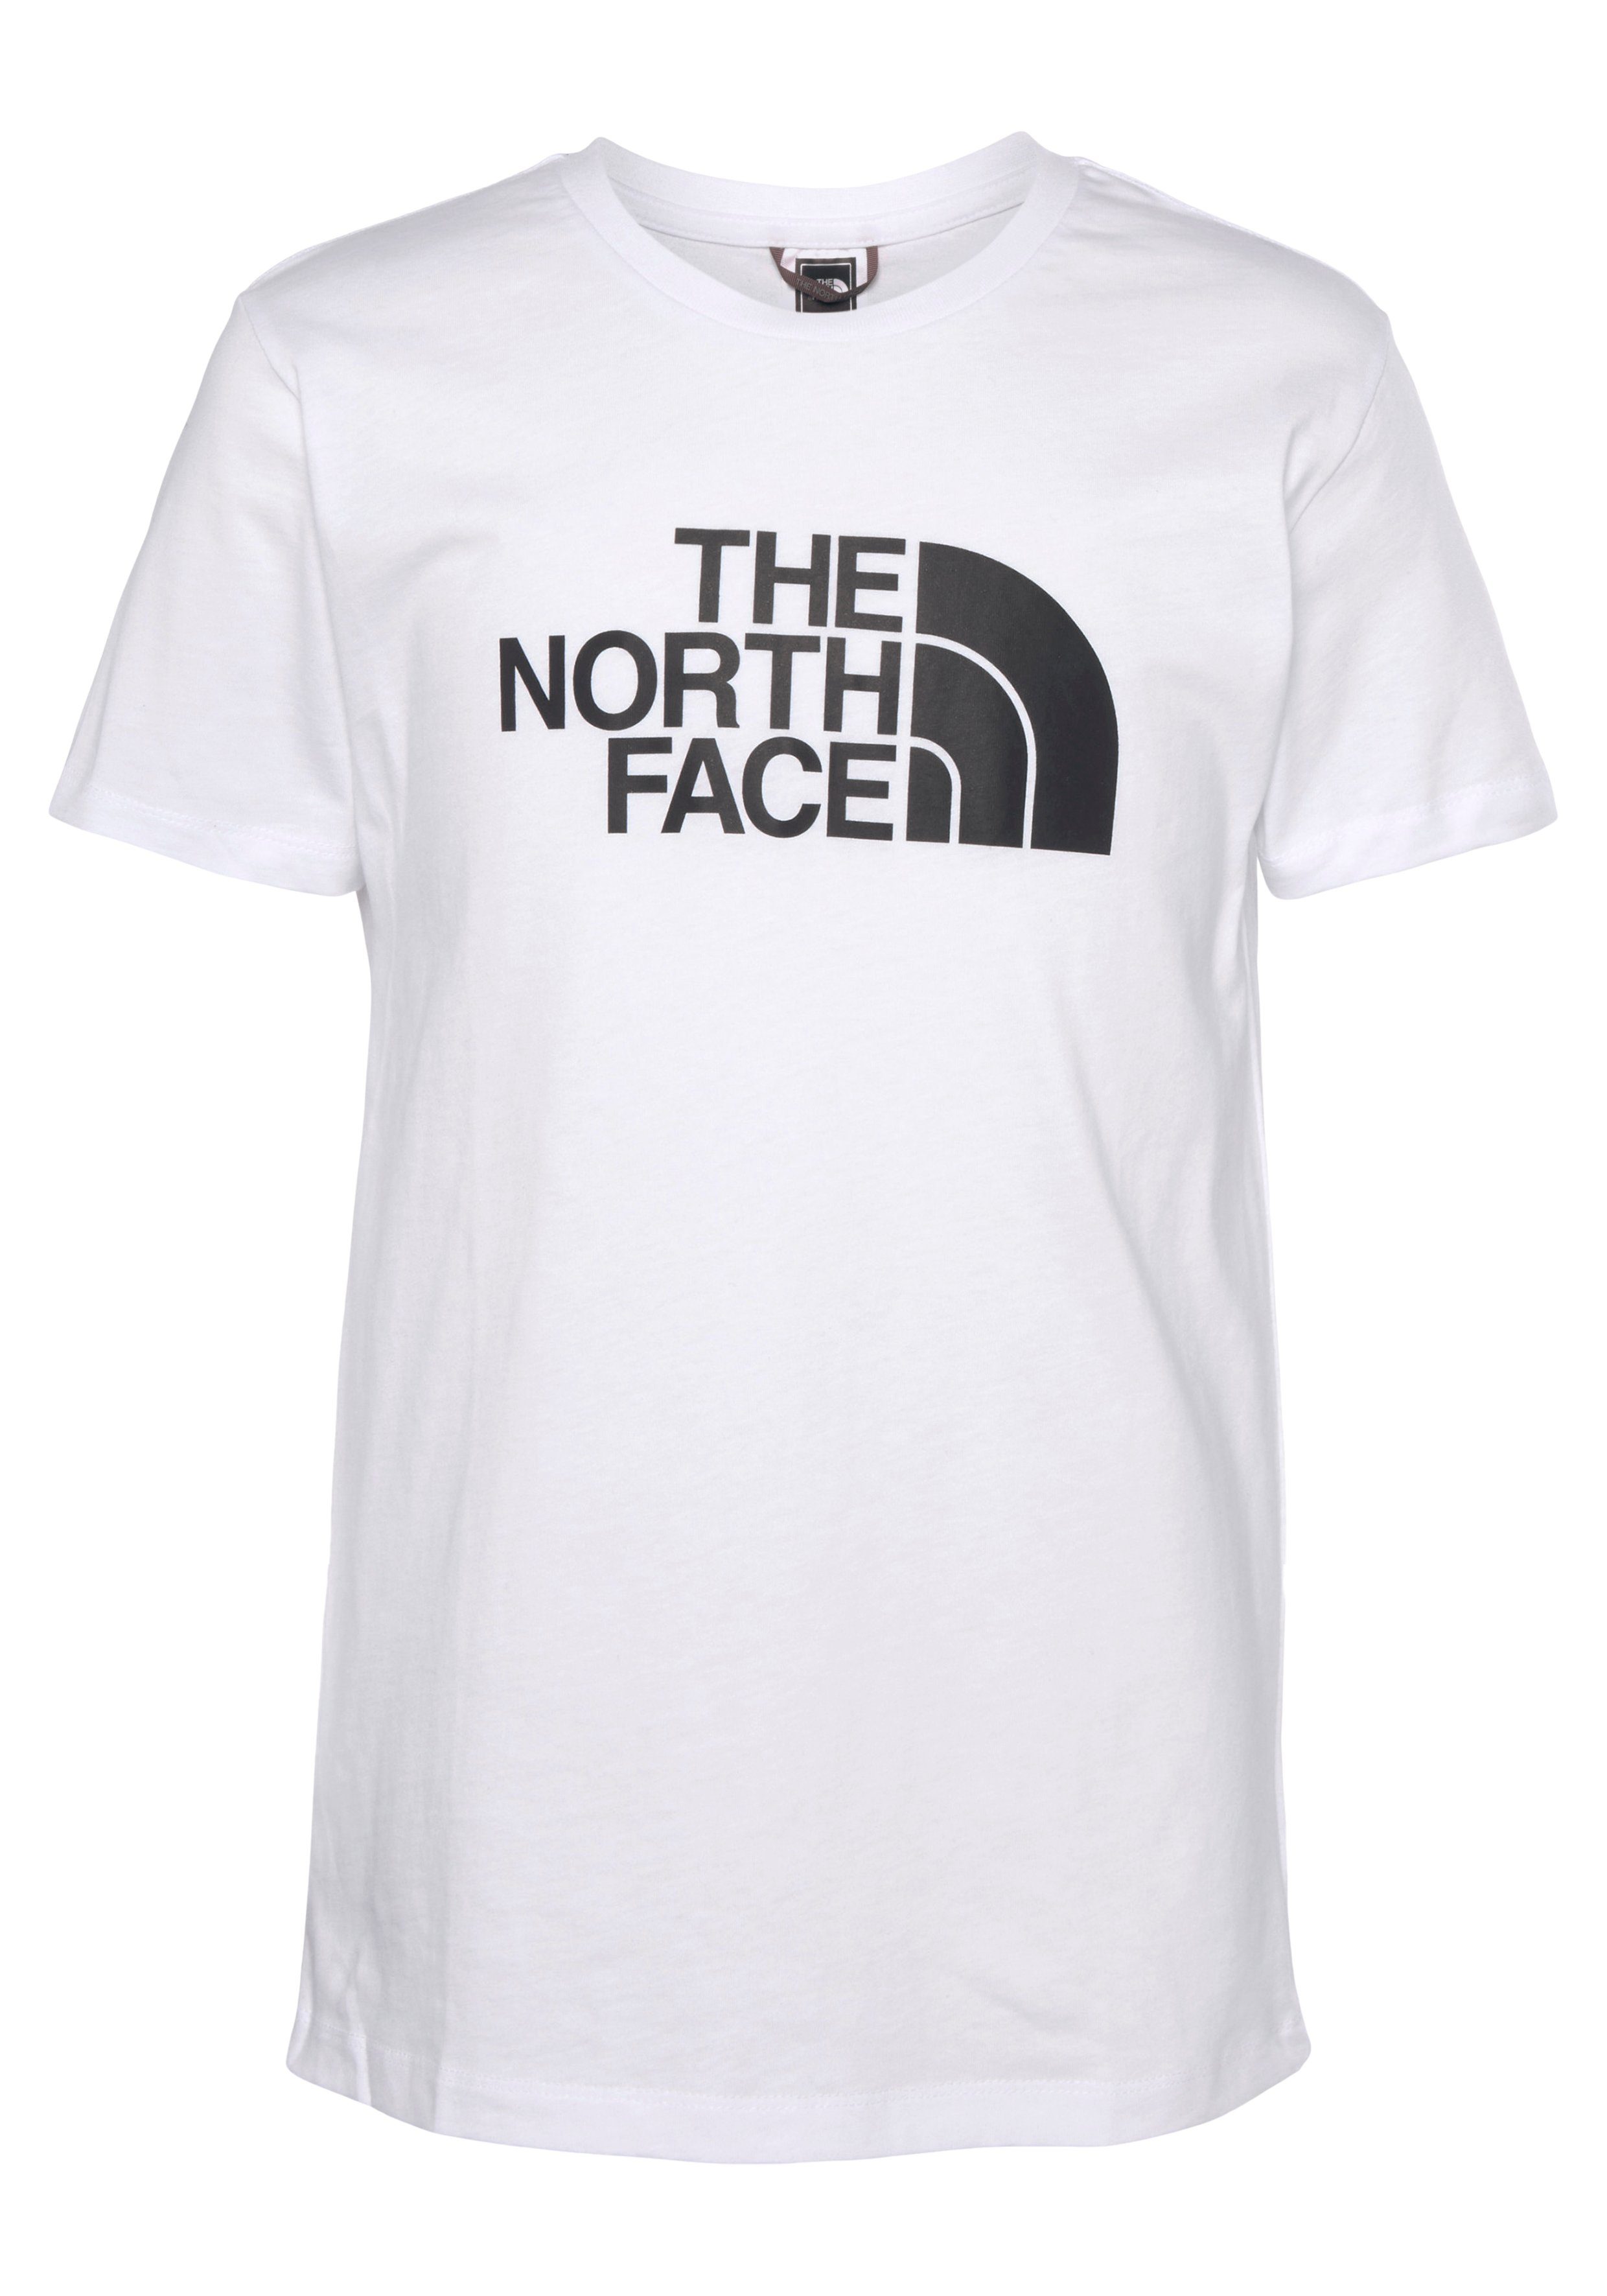 The North Face T-Shirt Kinder - EASY white TEE für